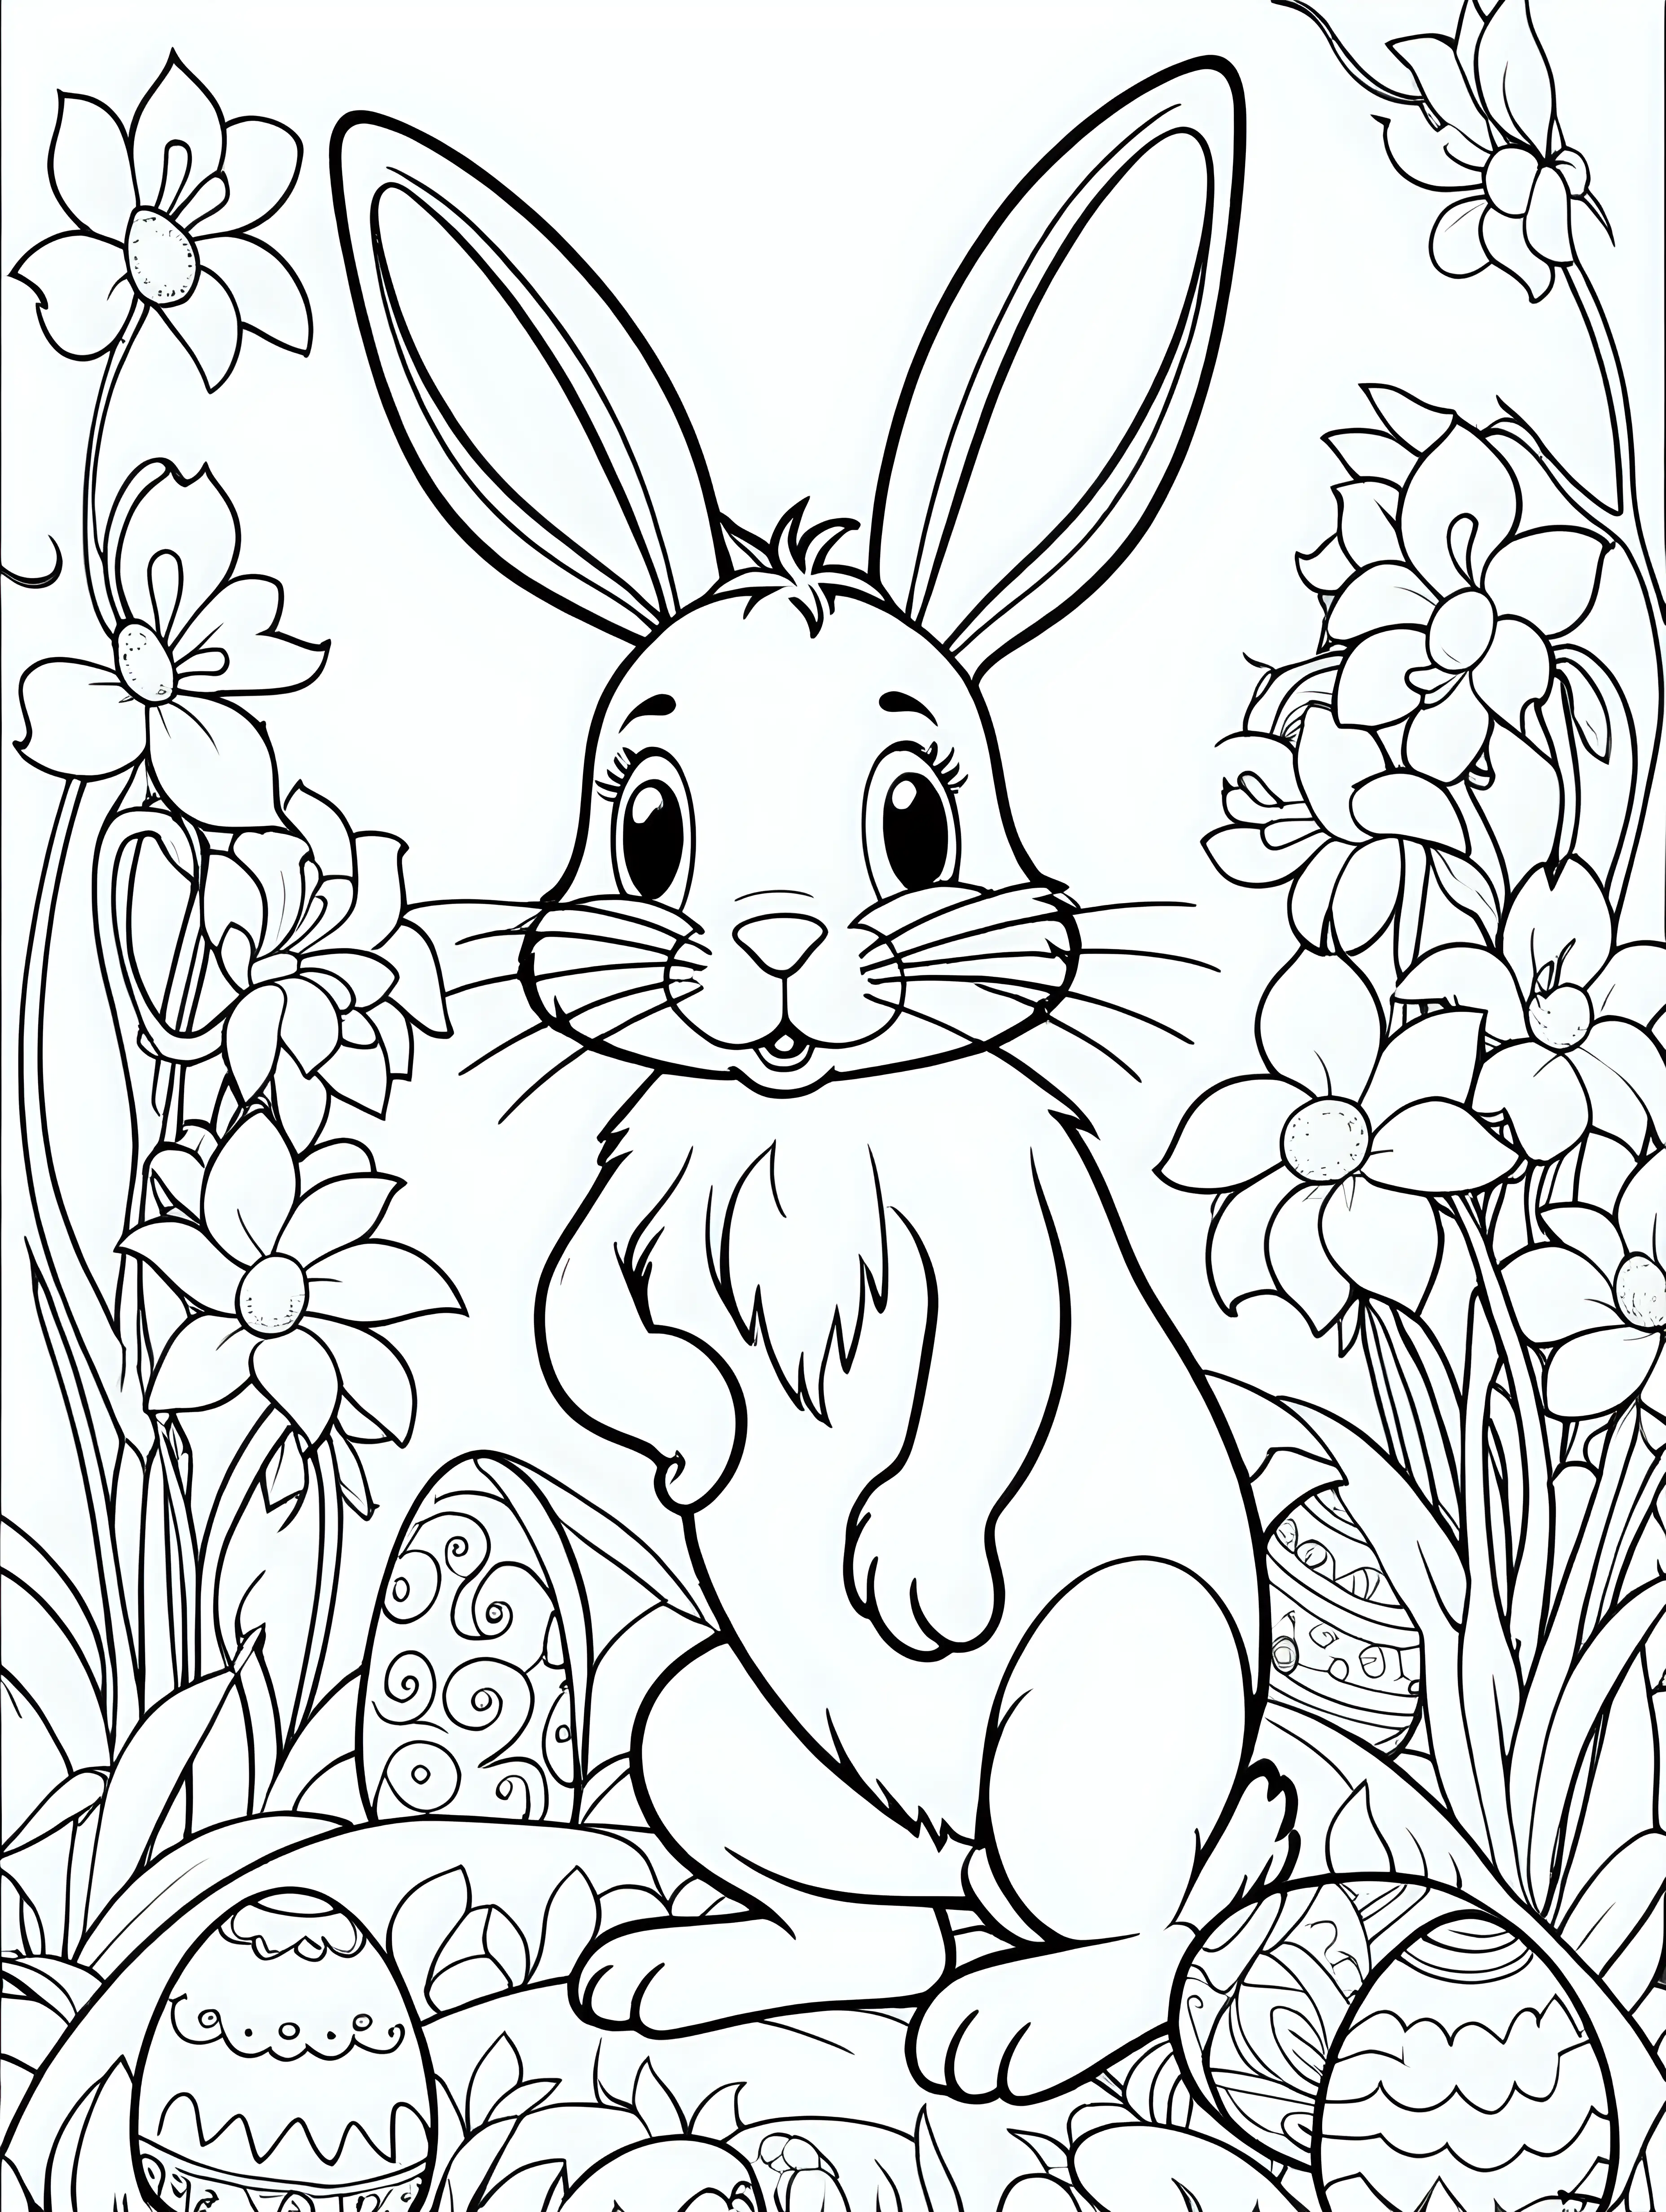 Easter Bunny Coloring Book Cover for 47 Year Olds Full Color Vector HD Illustration